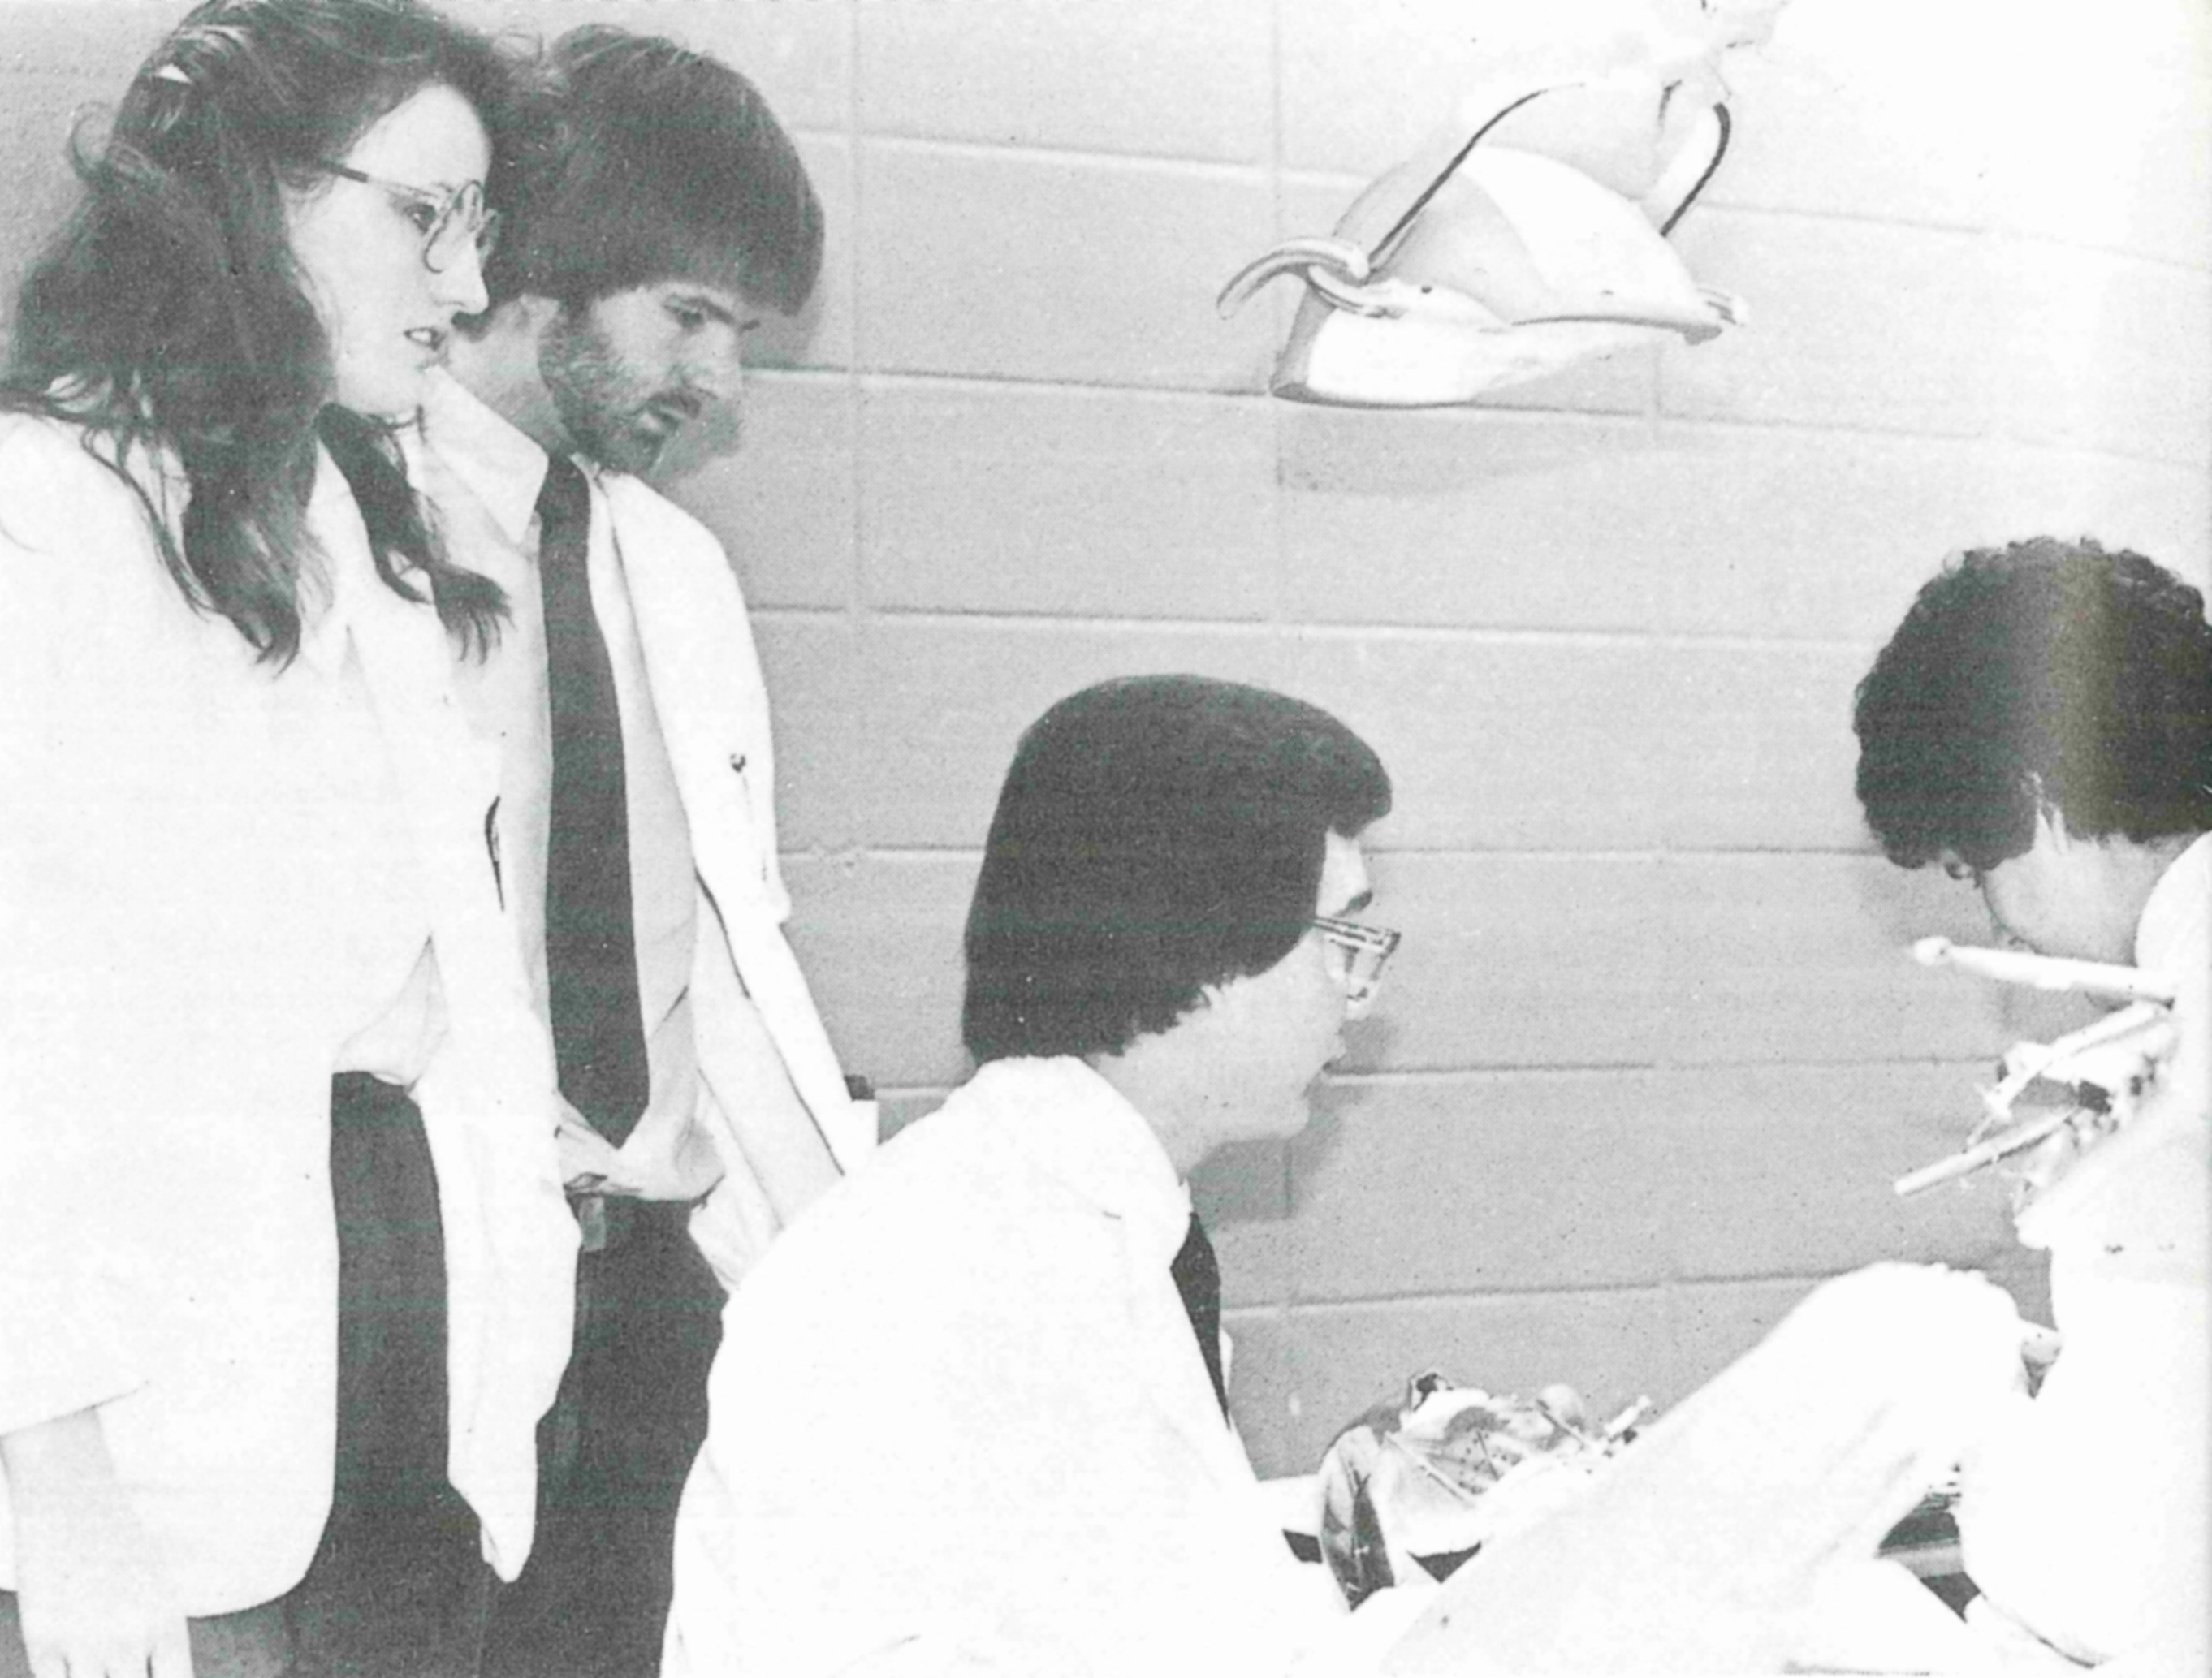 Horn, left, takes part in a community development morning at the SOD in 1981.